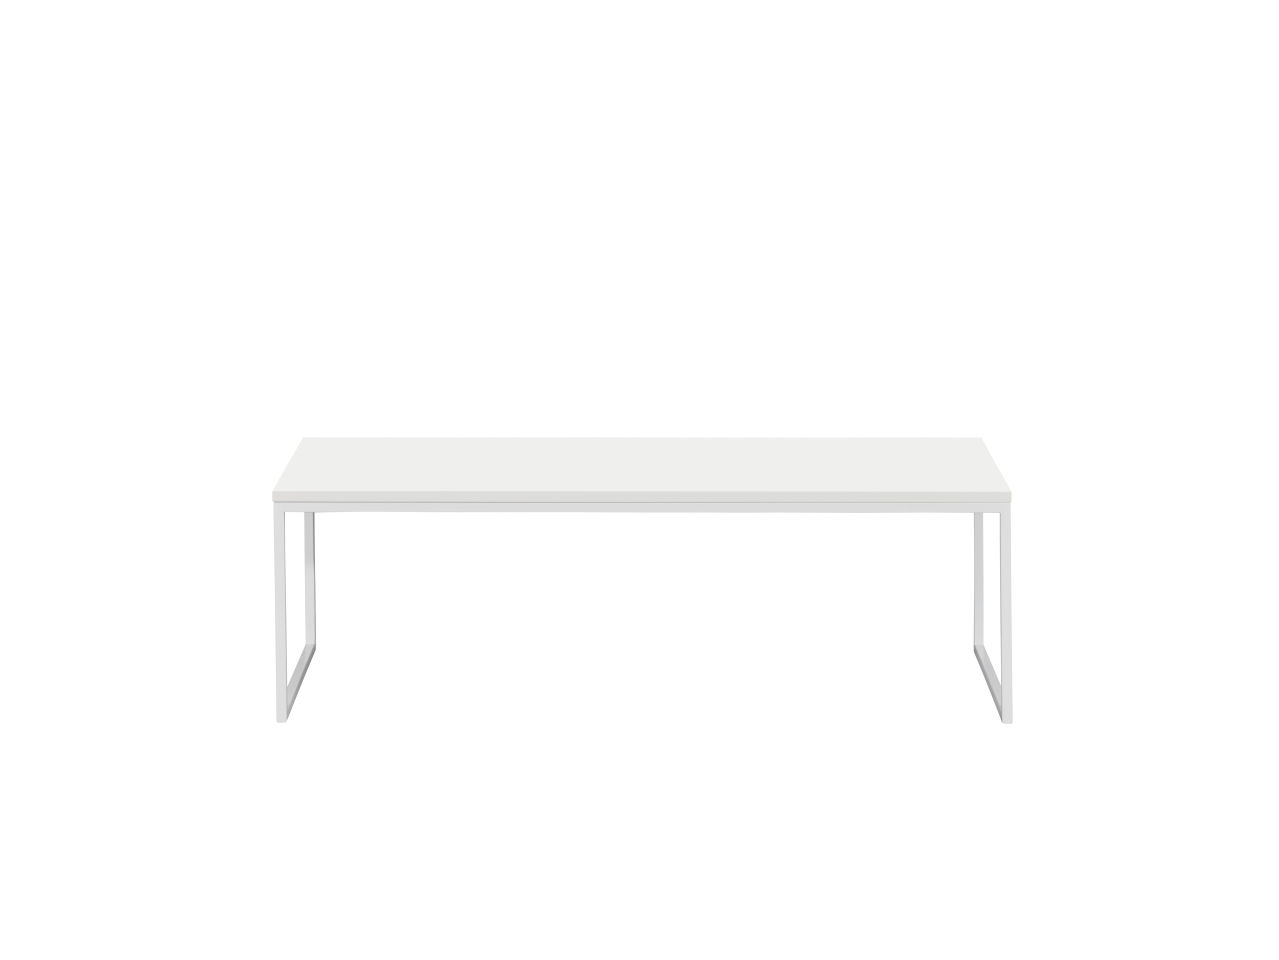 now! by hülsta. coffee tables | Couchtisch CT 17-1 | H: 33,8 cm | B: 105,8 cm | T: 41,7 cm